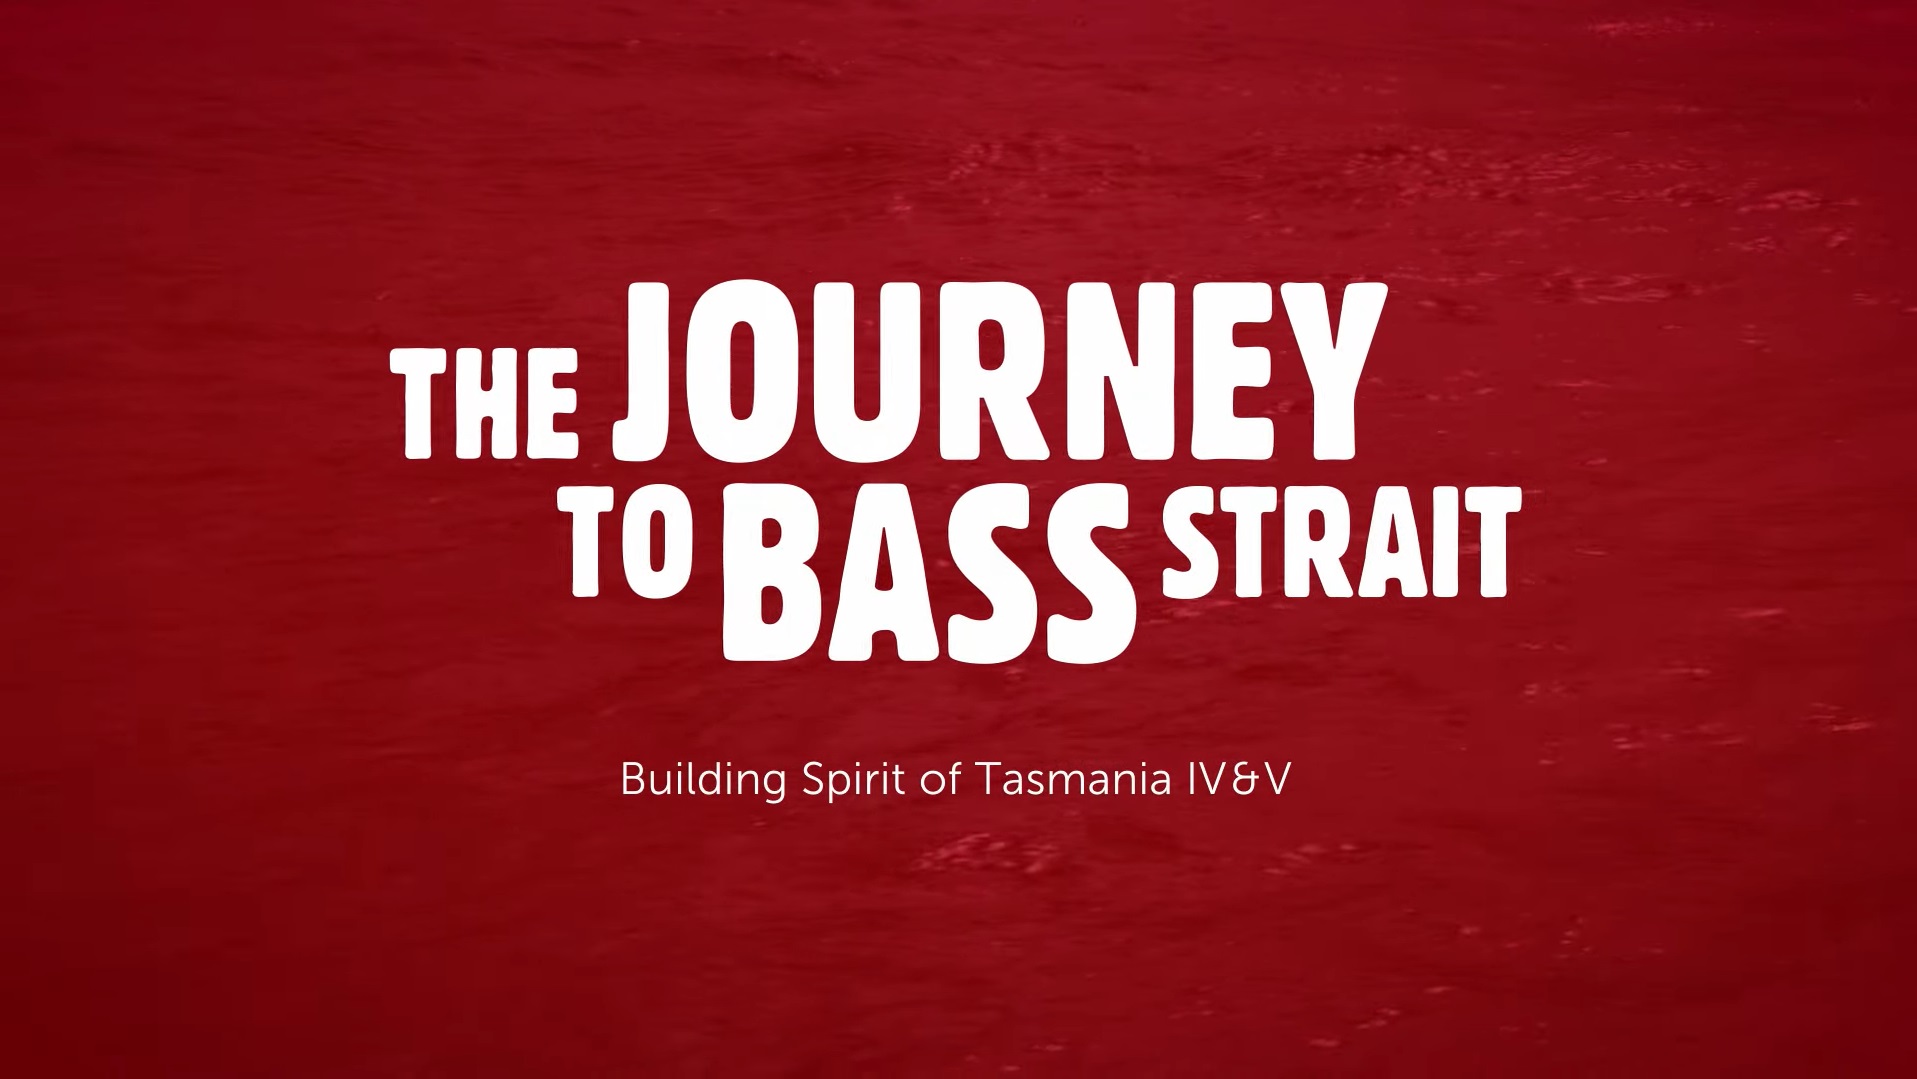 Introduction: The Journey To Bass Strait